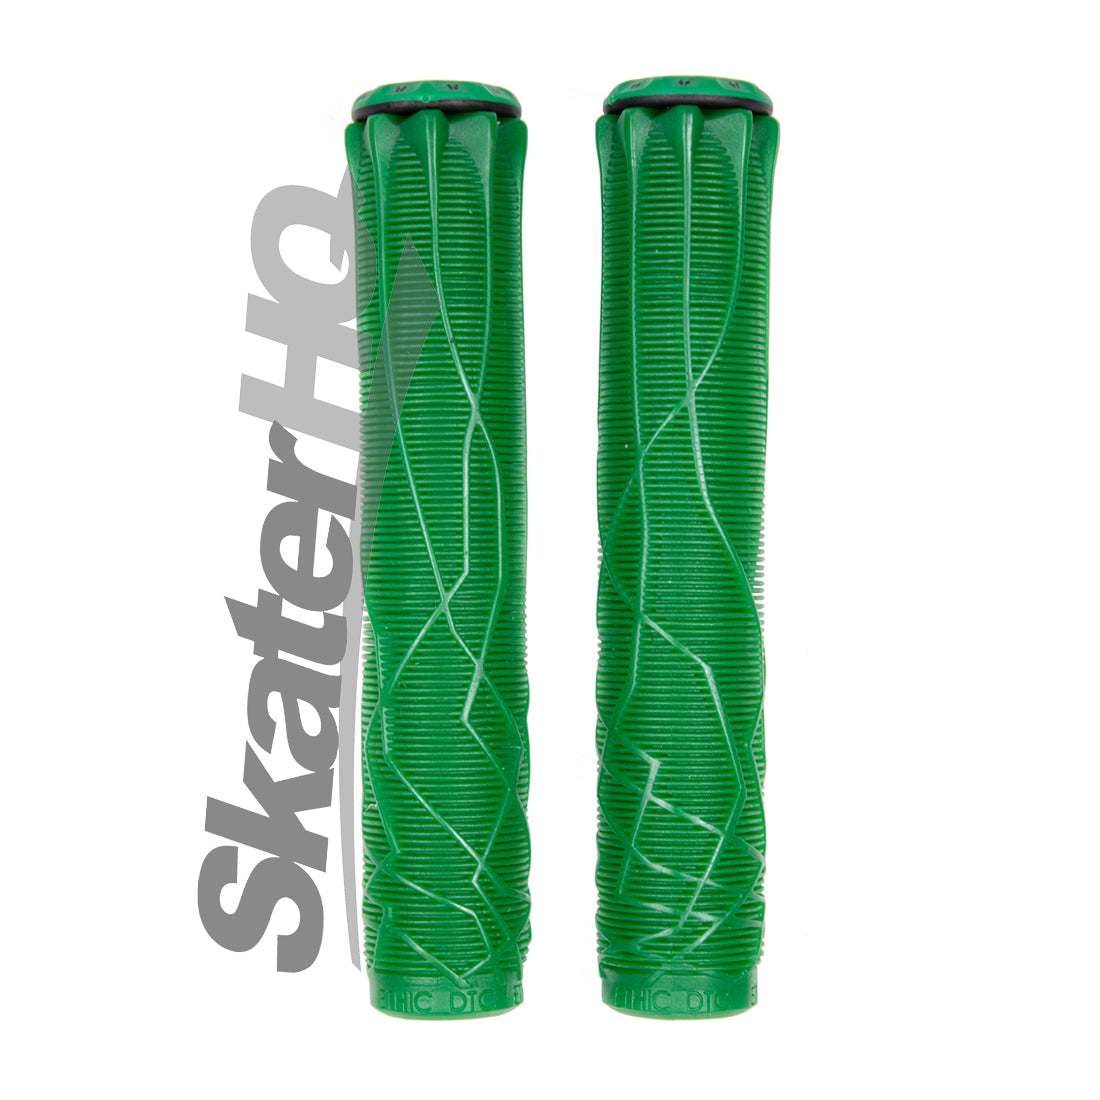 Ethic DTC Handle Grips - Green Scooter Grips